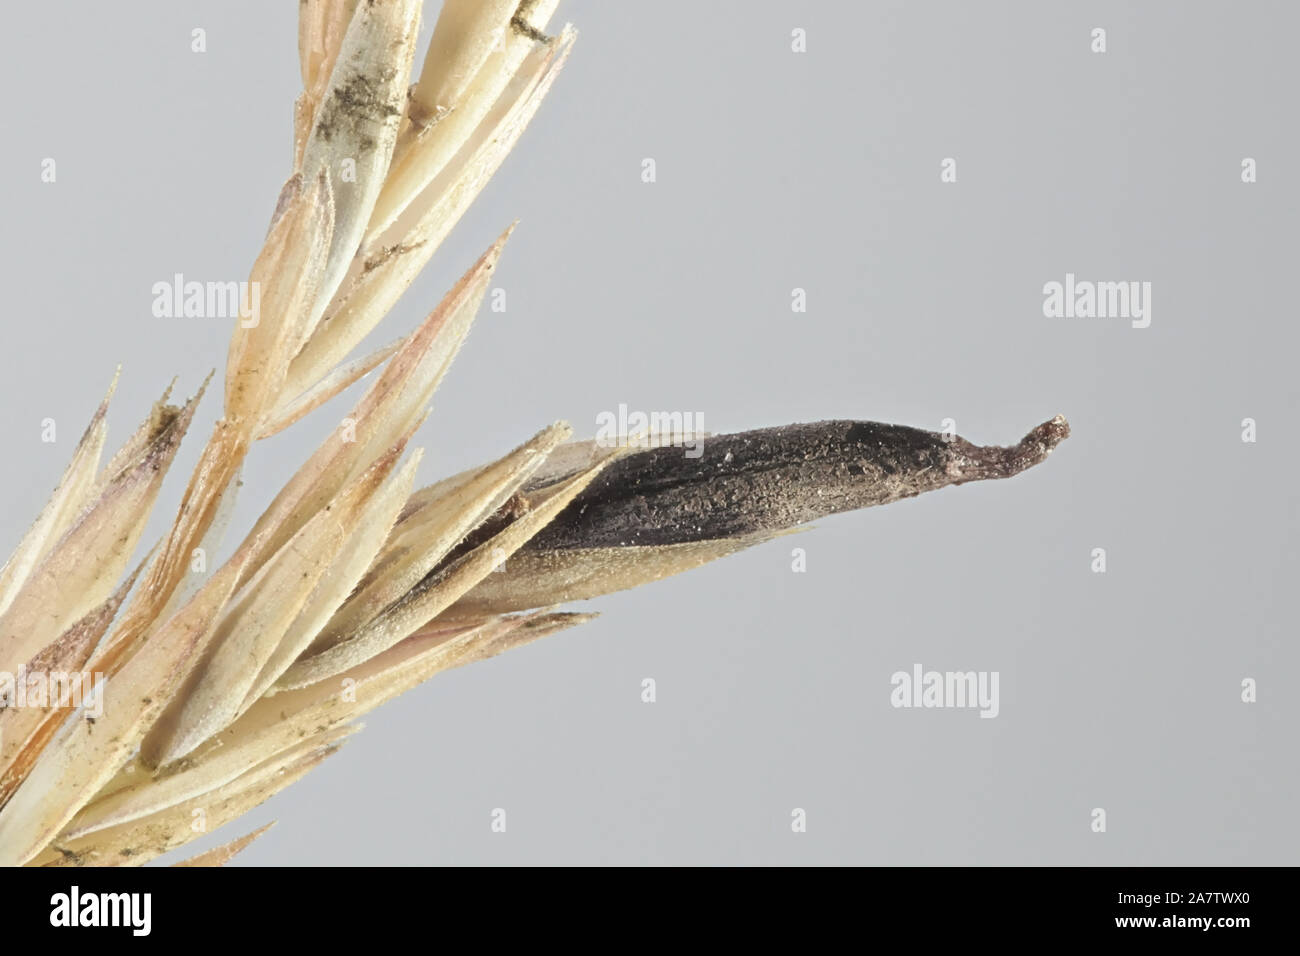 Claviceps purpurea, known as ergot fungus, growing on meadow grass (Poa sp) in Finland Stock Photo